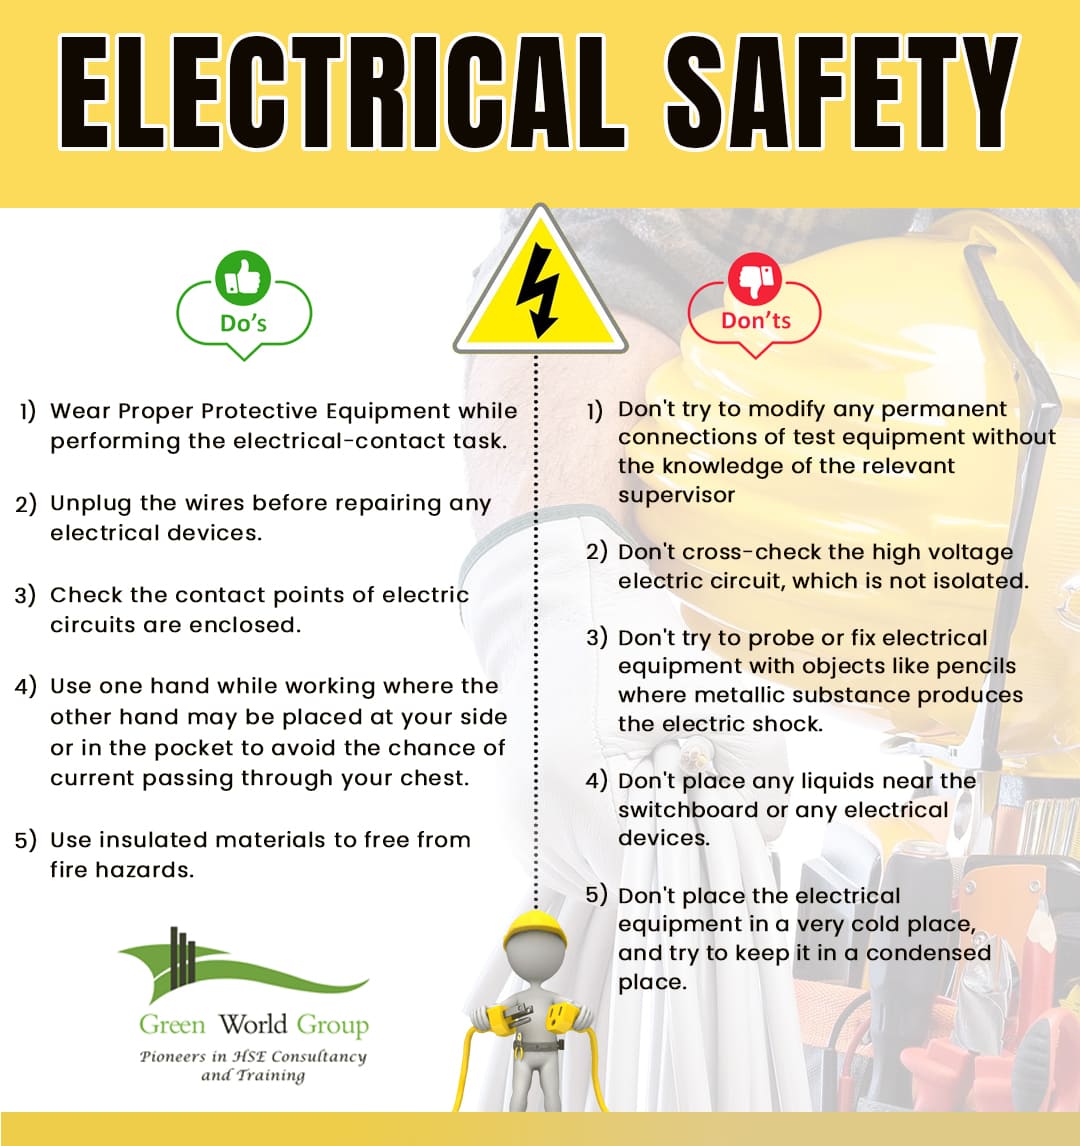 Electrical safety at Workplace - GREEN WORLD GROUP INDIA | Nebosh ...